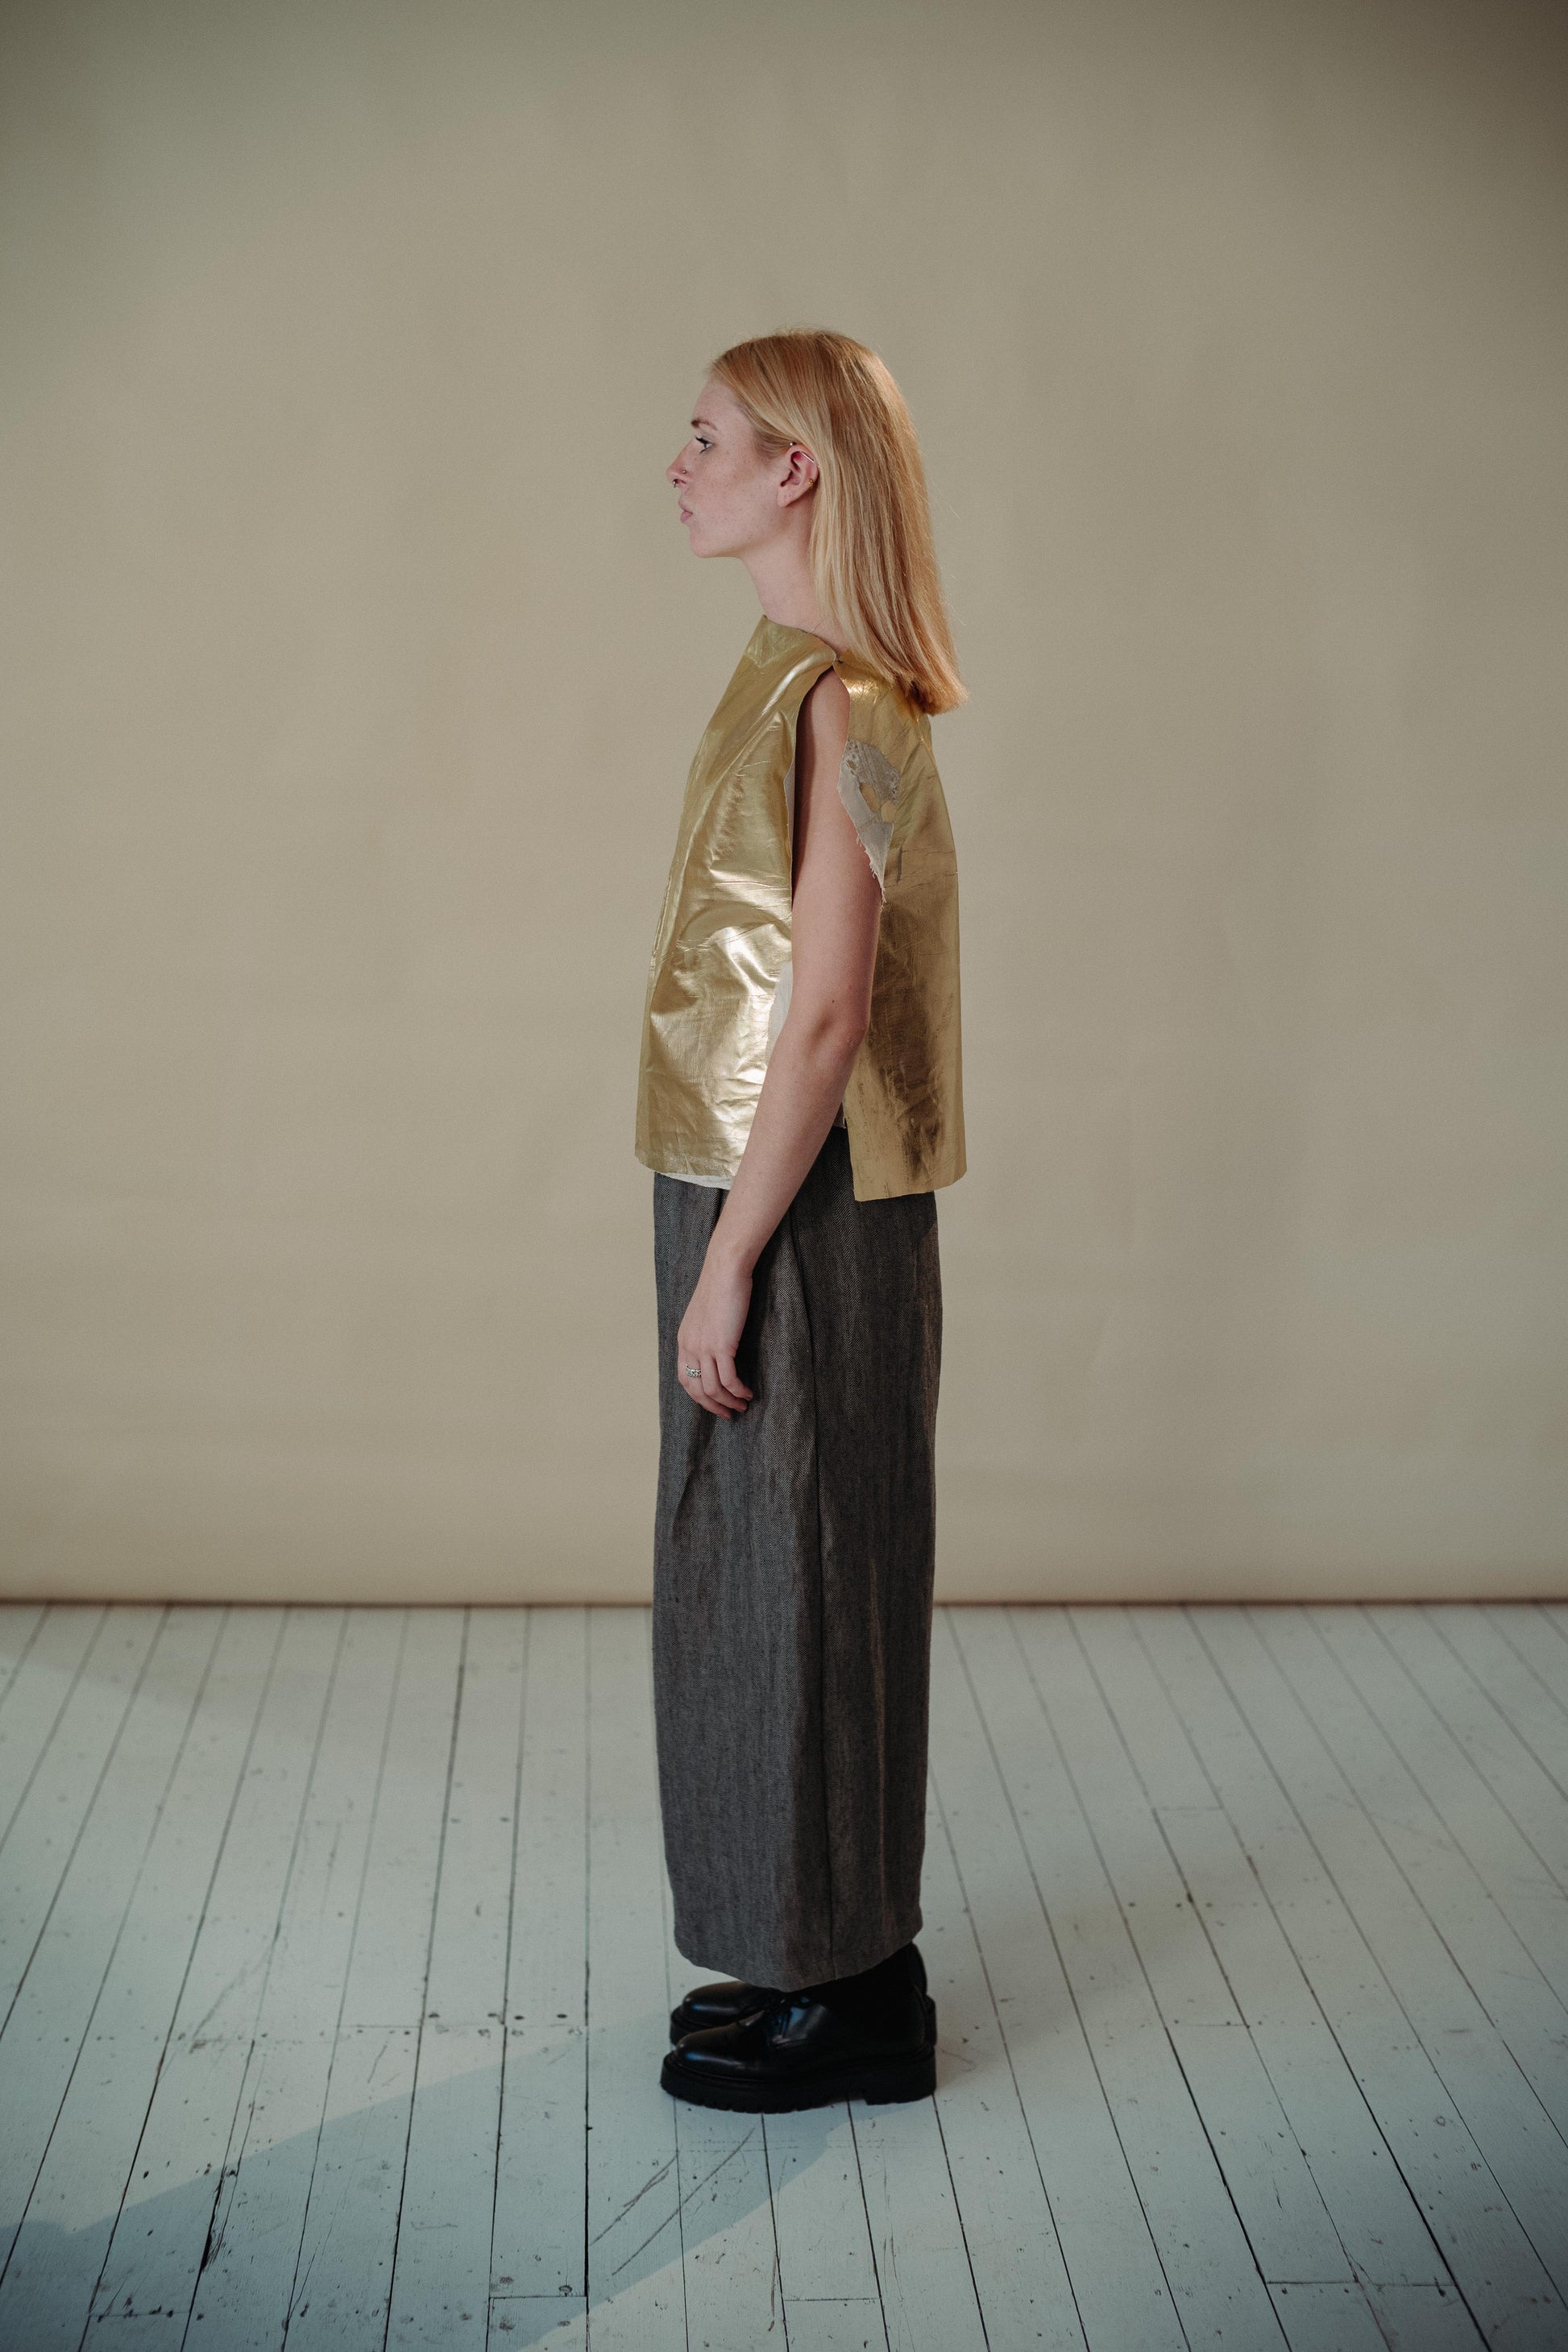 WRAP TROUSER | Our new oversized wrap trousers are created with a heavy weight herringbone linen. They feature a very slightly curved side seam and 'wrap over' detail at the waist. A little contrast gold stitching on the button hole to remind you to look